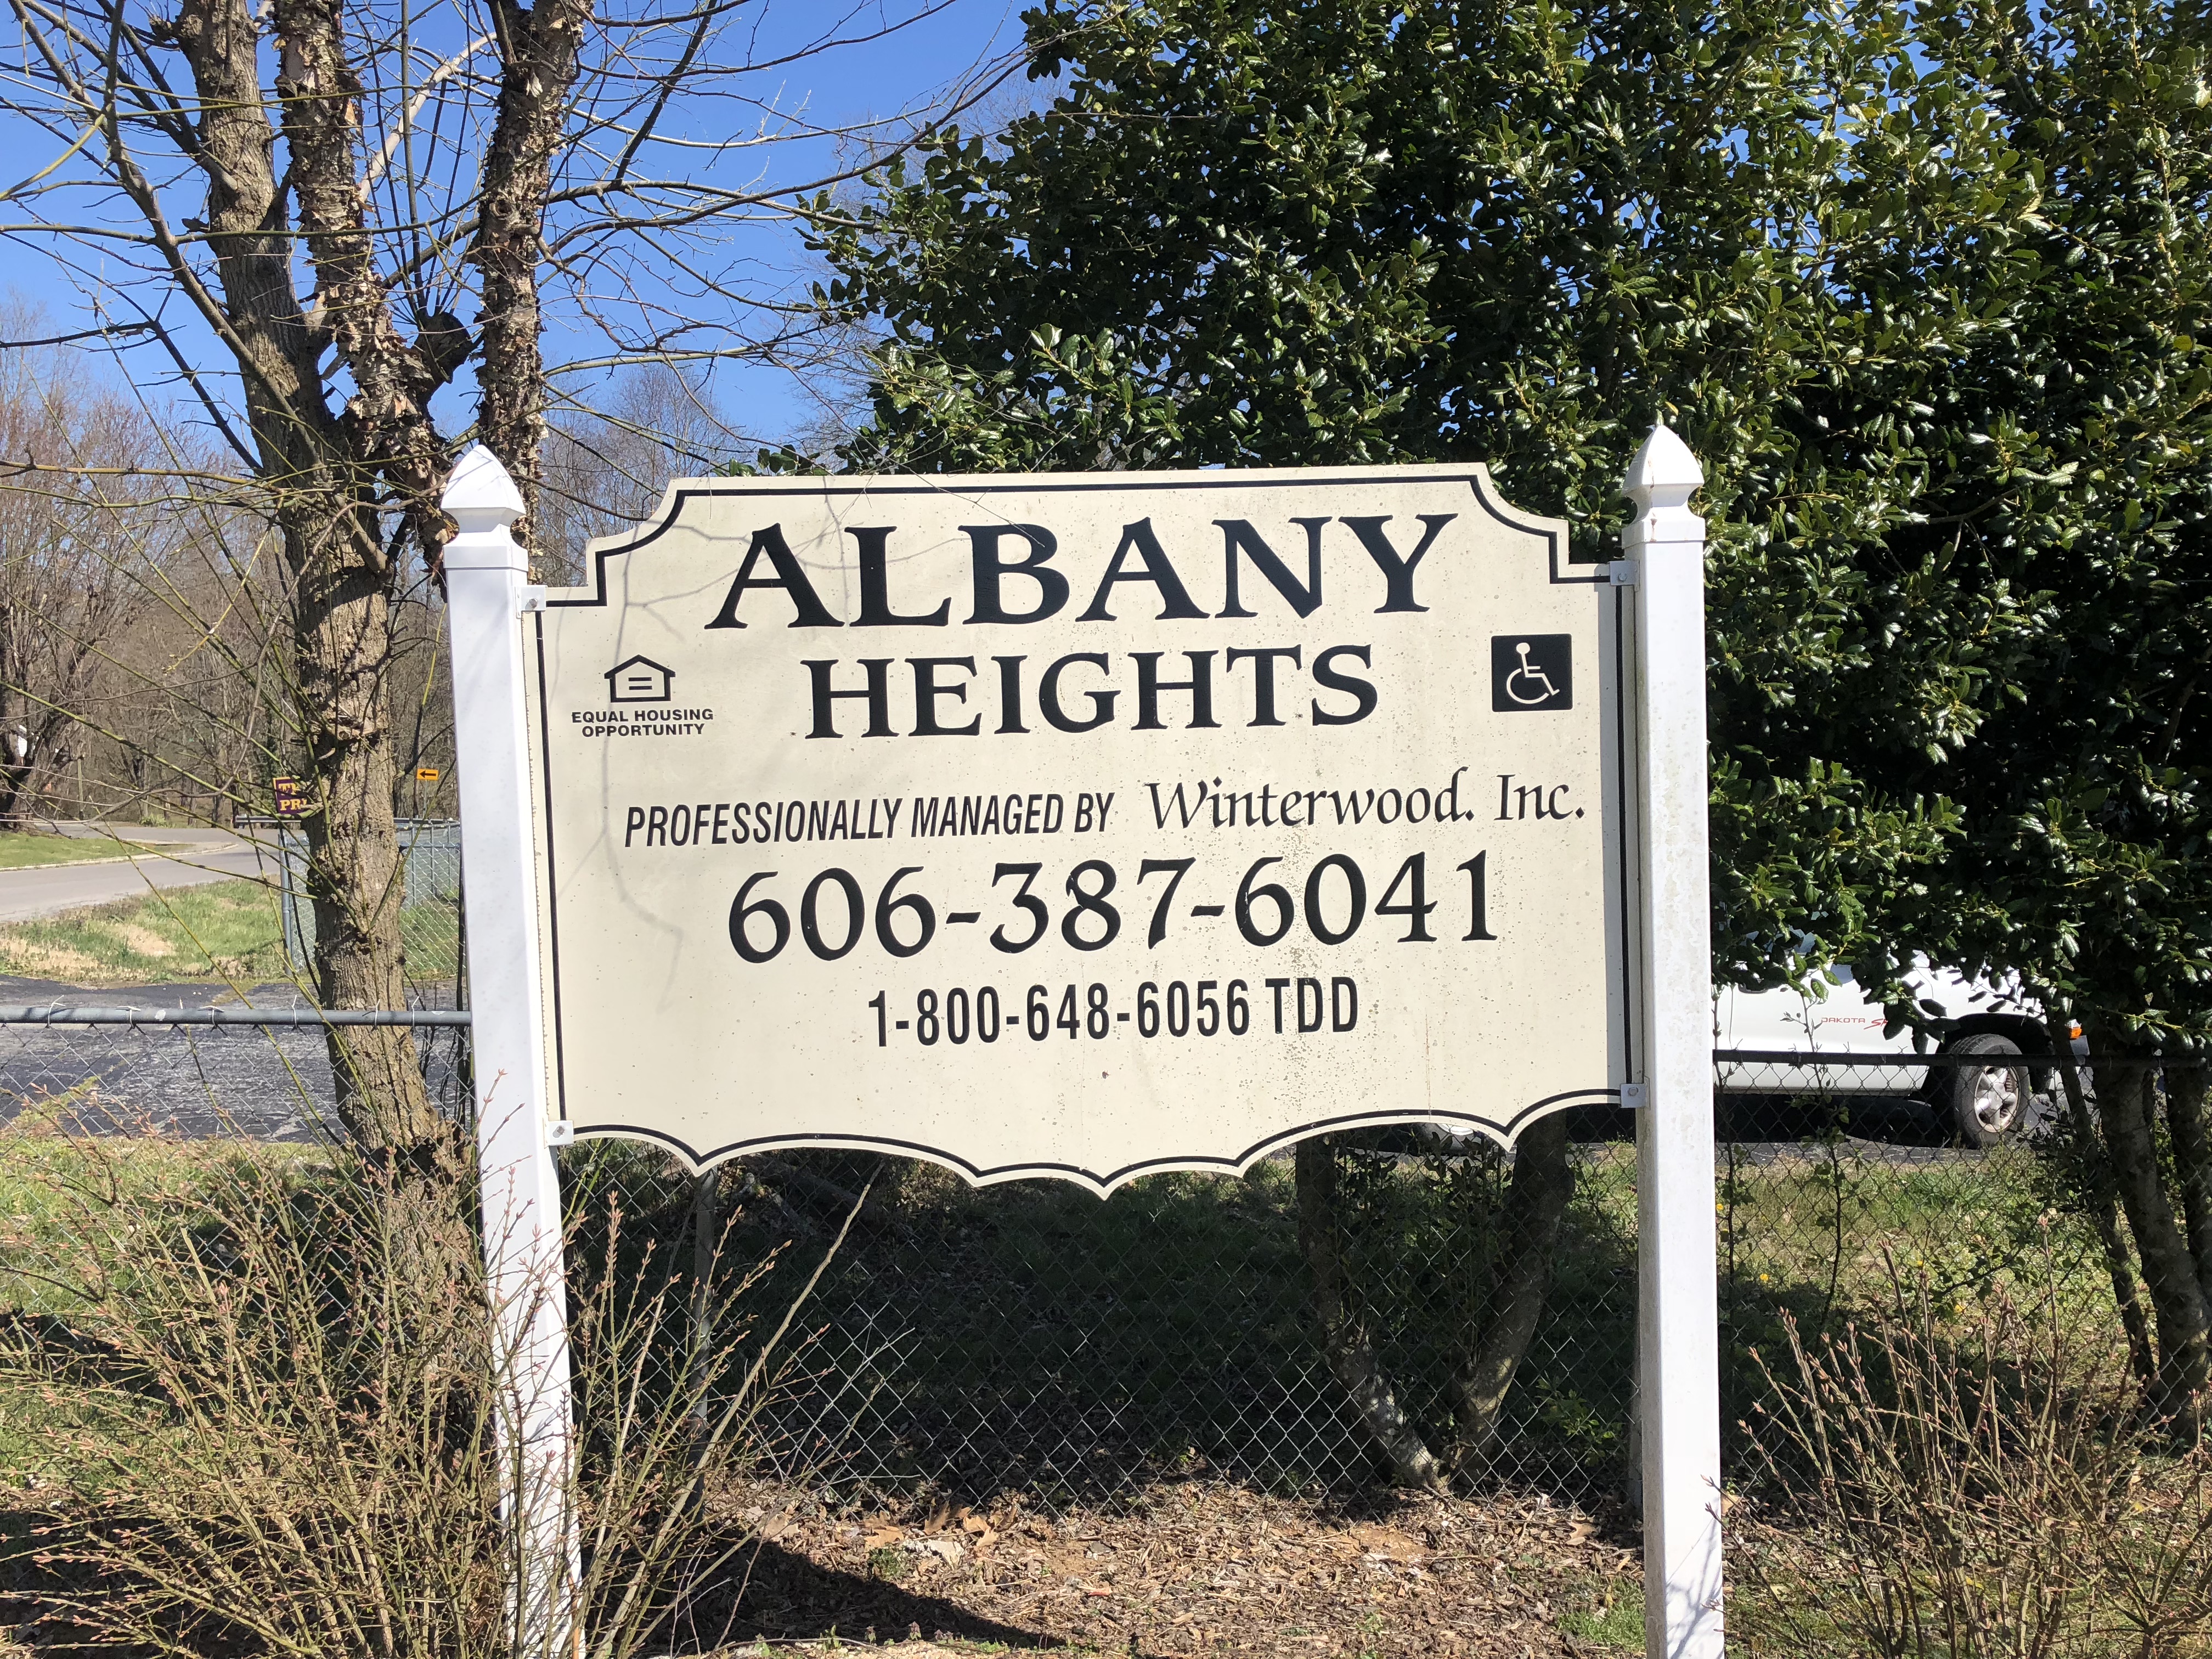 ALBANY HEIGHTS